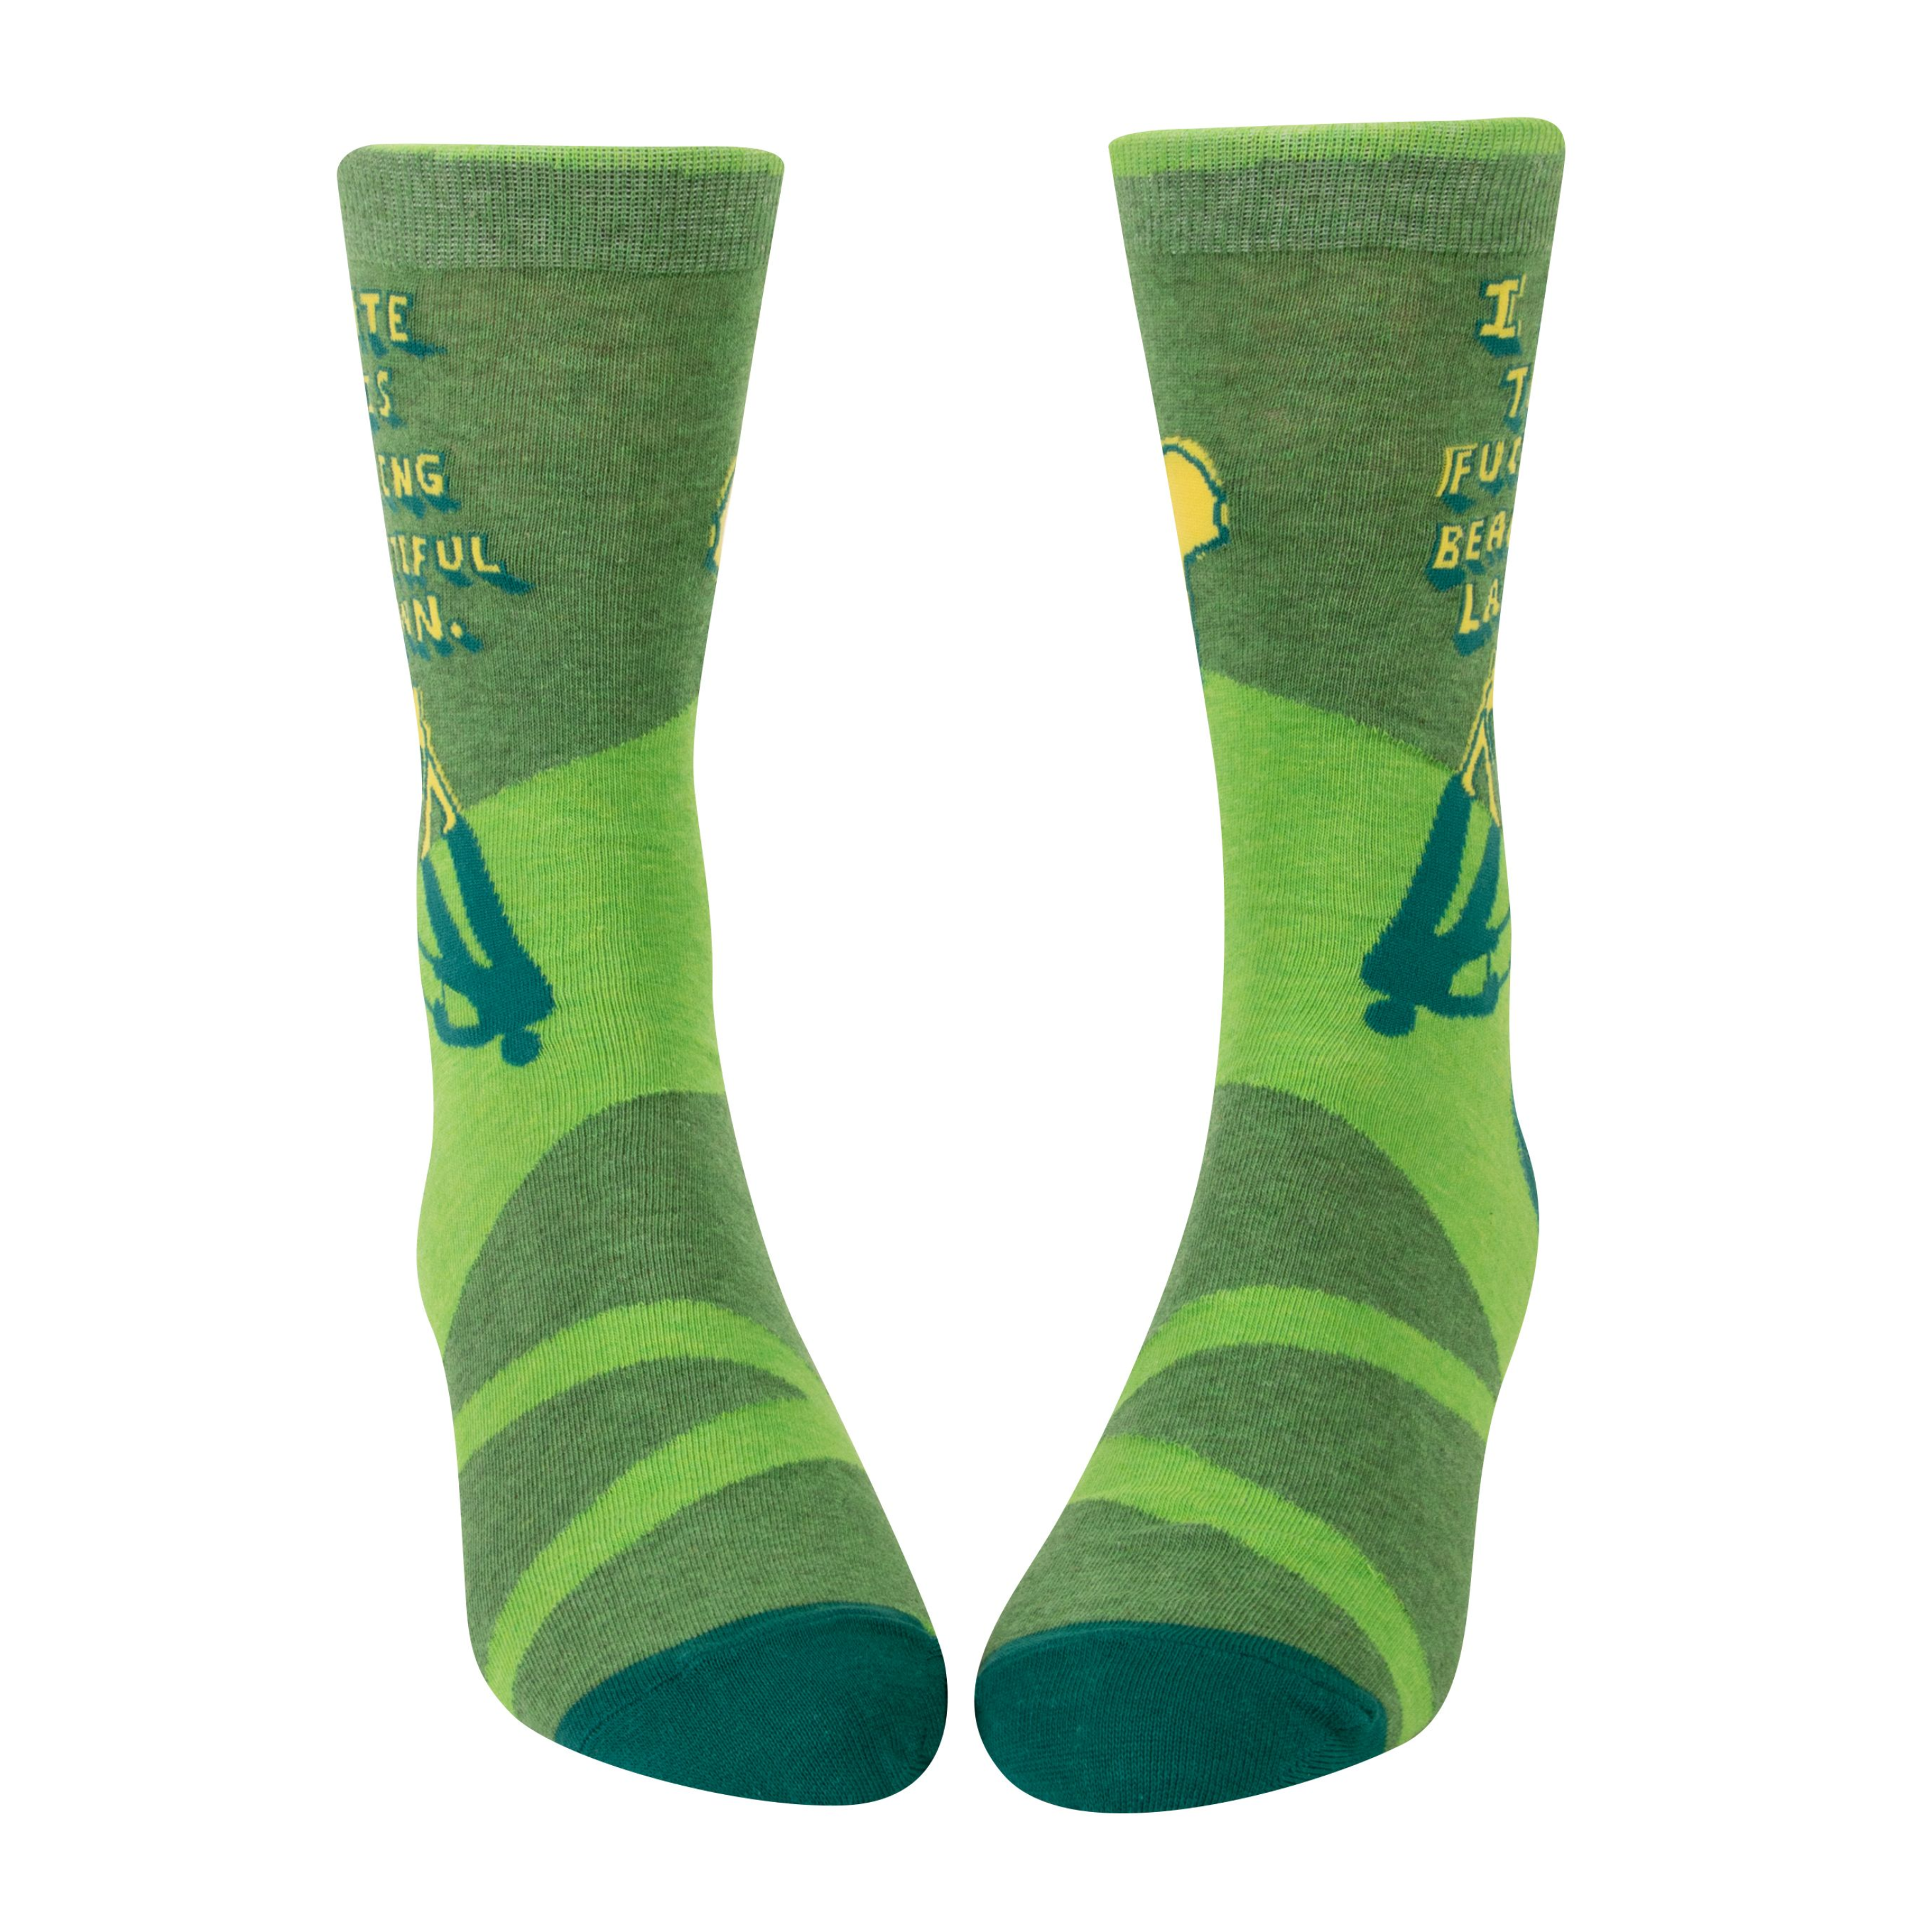 multi green socks with figure of person mowing lawn 